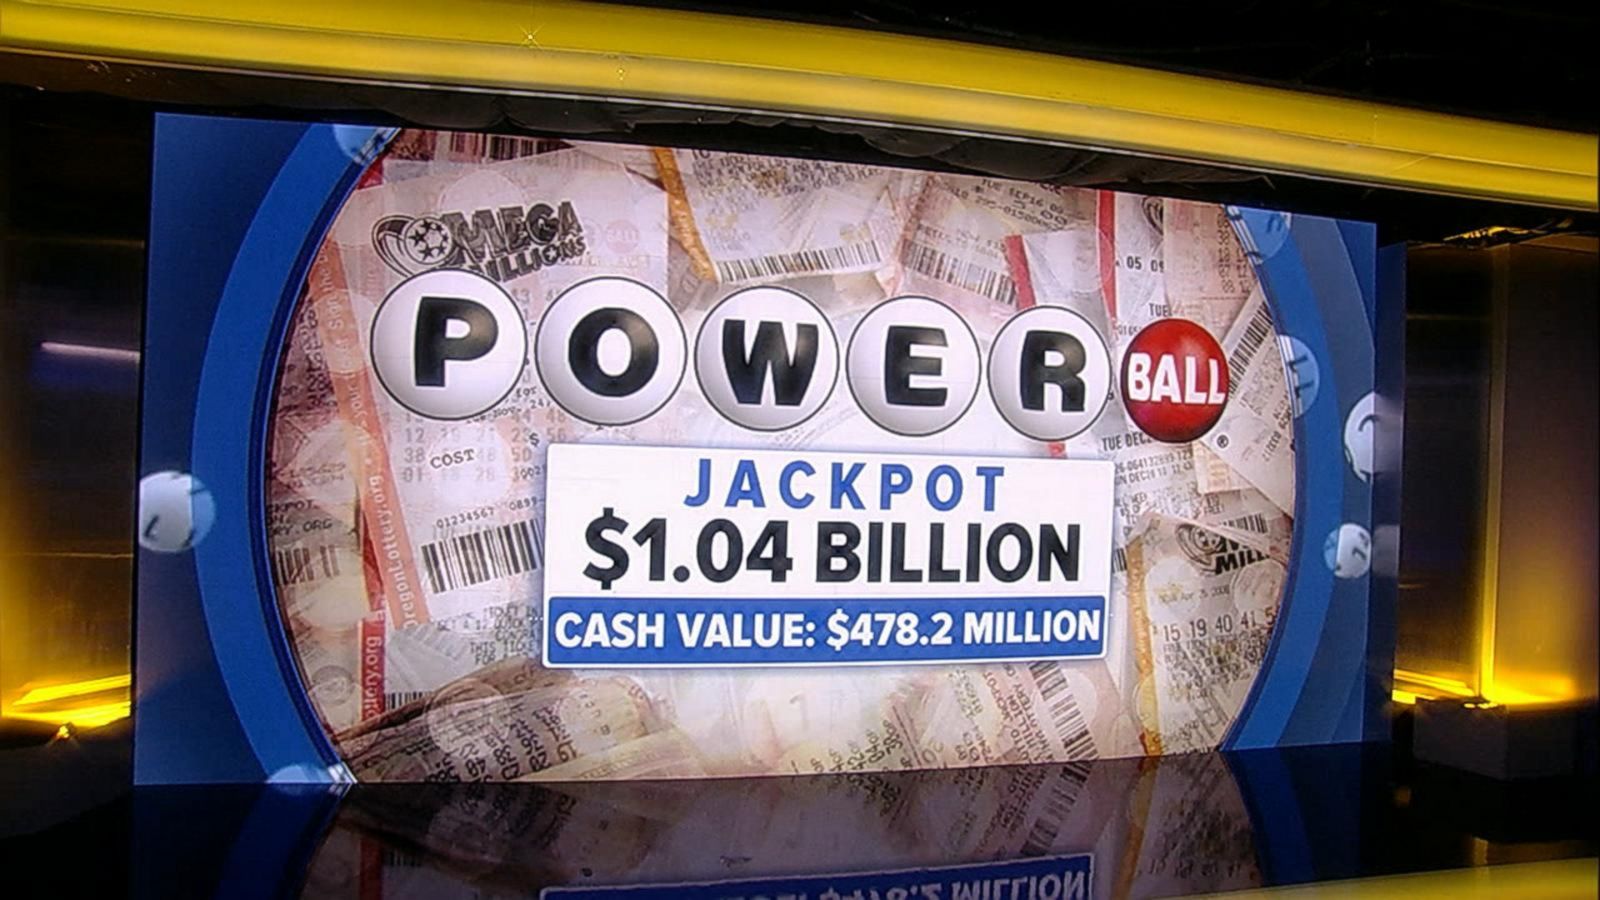 VIDEO: Powerball jackpot soars to more than $1 billion